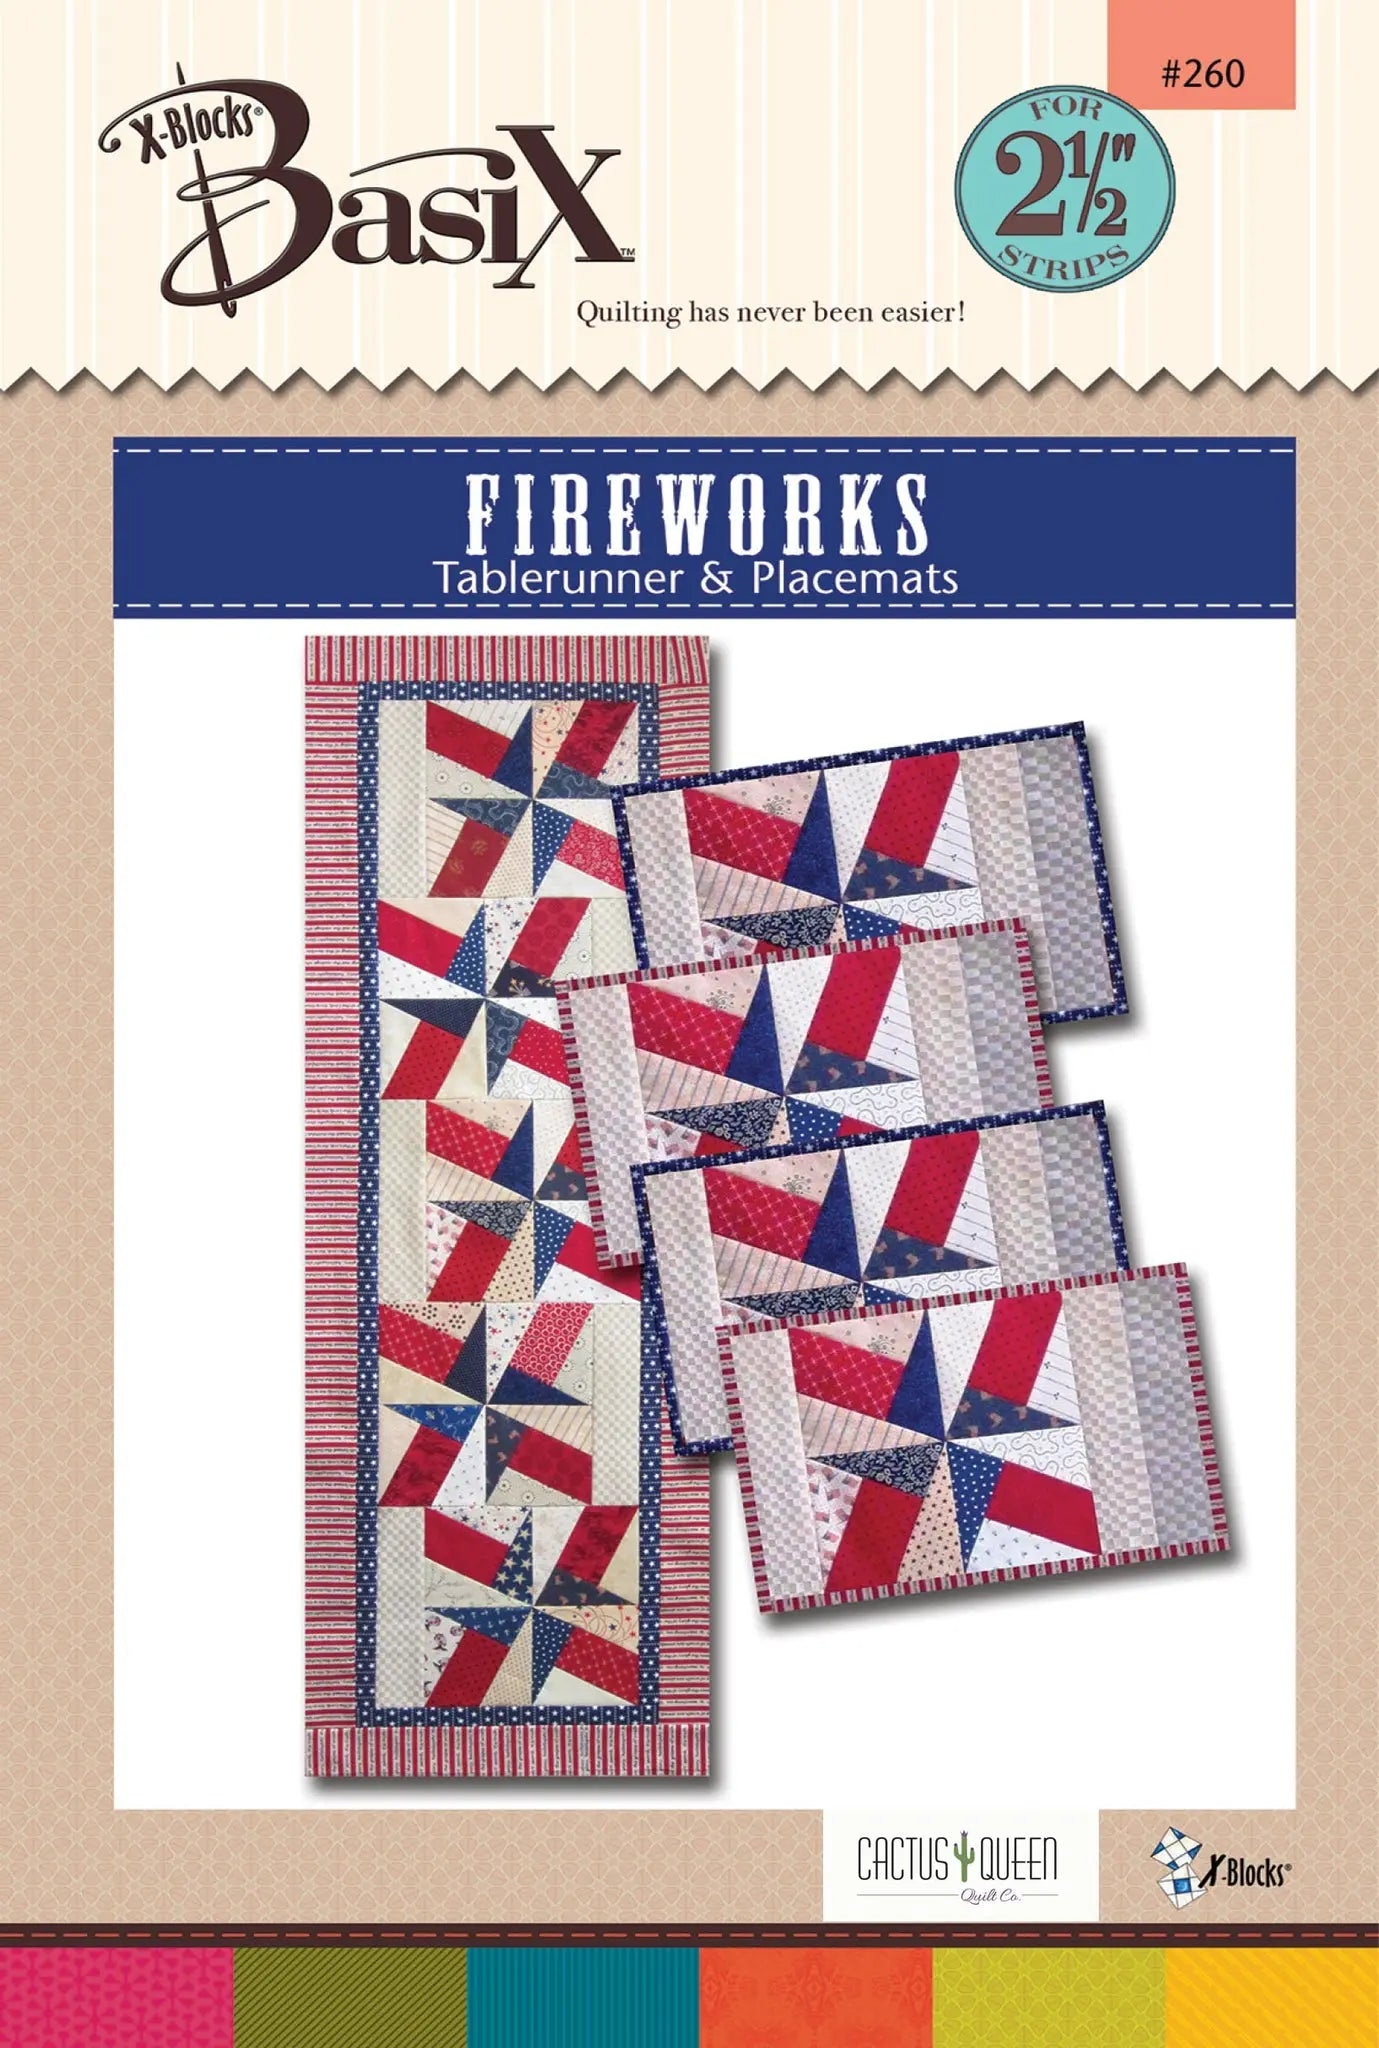 BasiX Fireworks Pattern - Linda's Electric Quilters